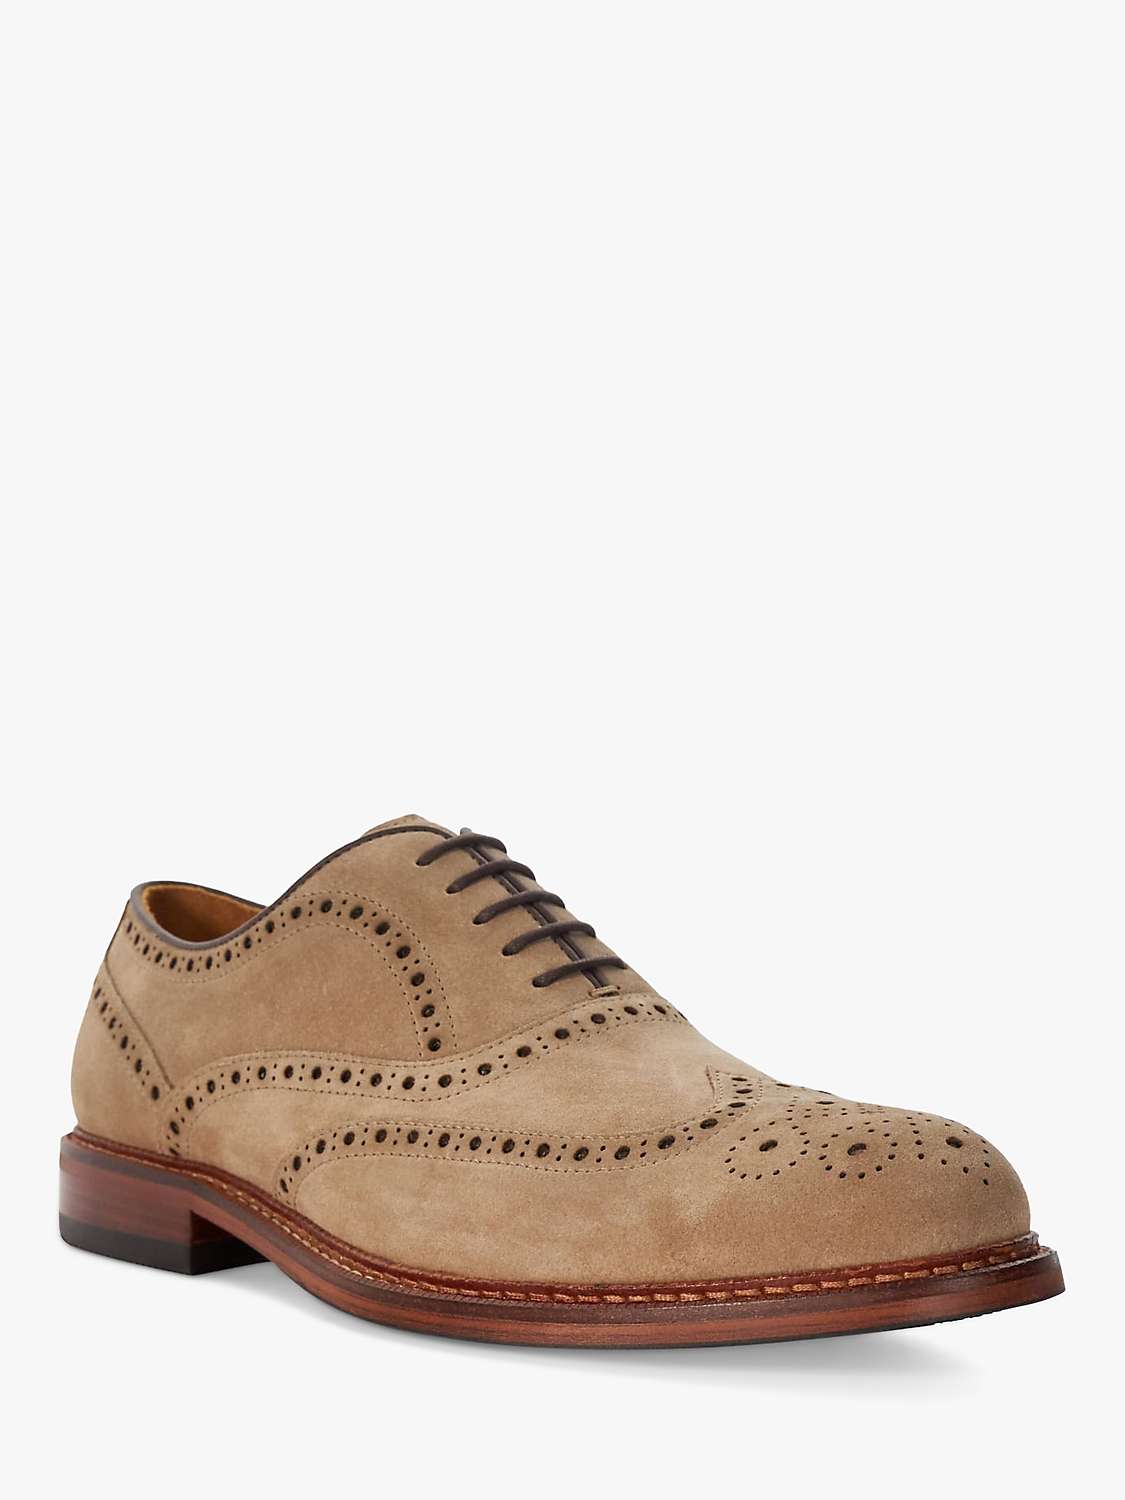 Buy Dune Solihull Suede Oxford Brogue Shoes, Brown Online at johnlewis.com